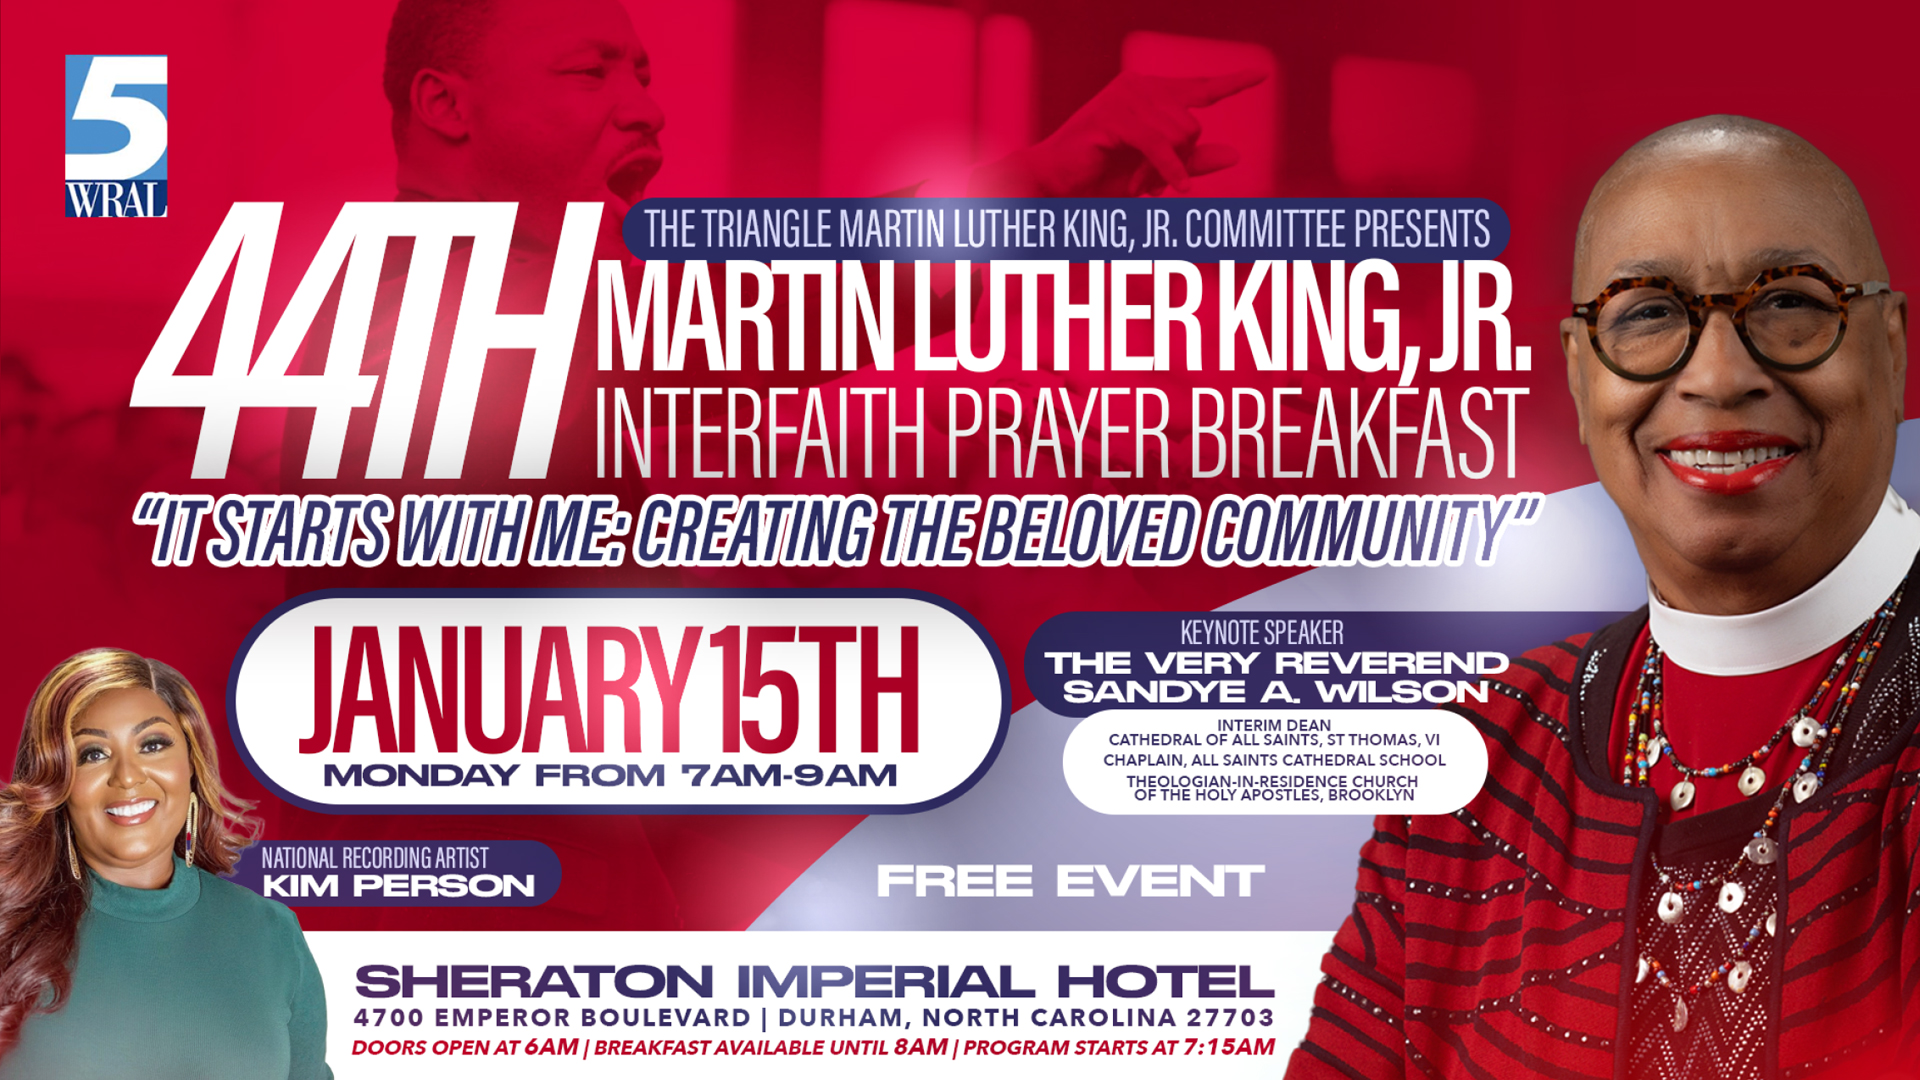 44th Annual Triangle MLK Event